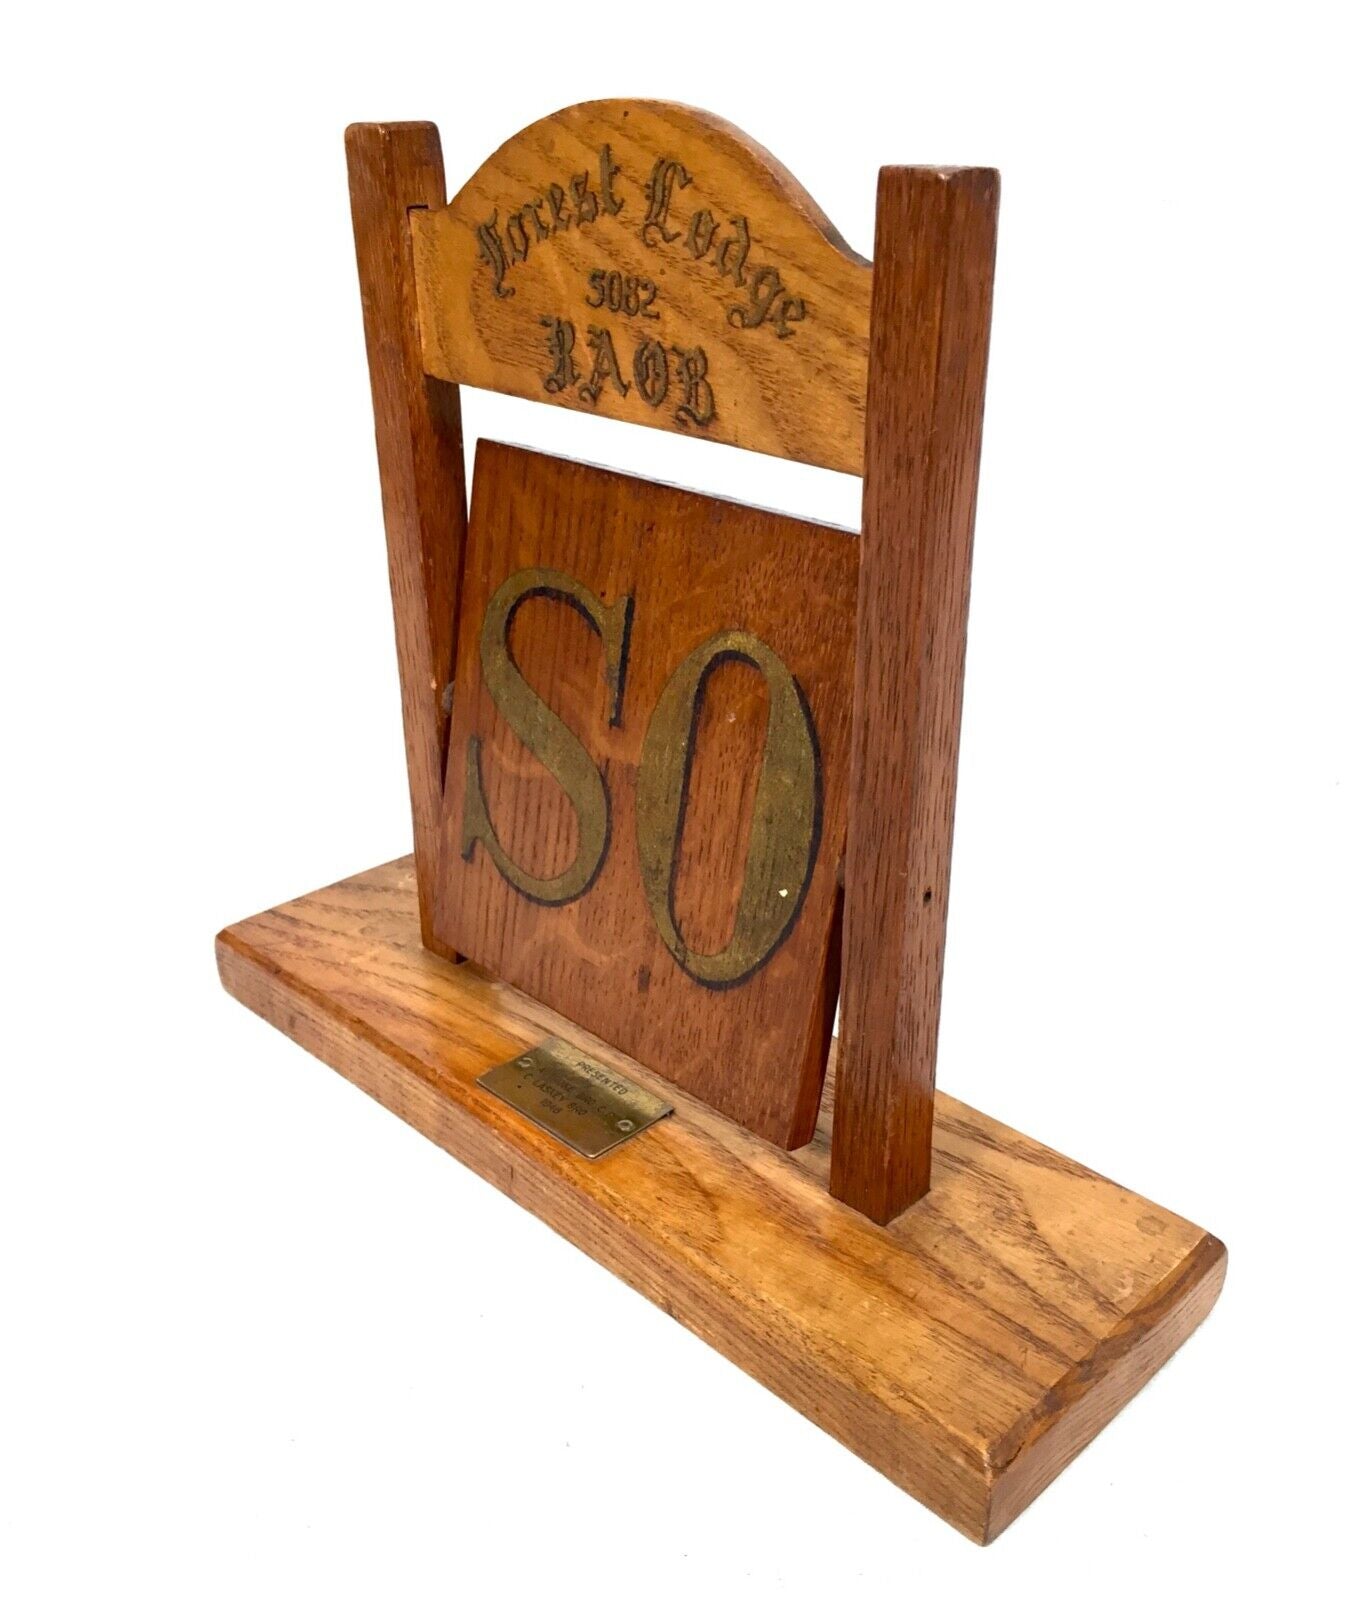 Antique Masonic Lodge Rotating Oak Sign from Forest Lodge 5082 Dated 1946